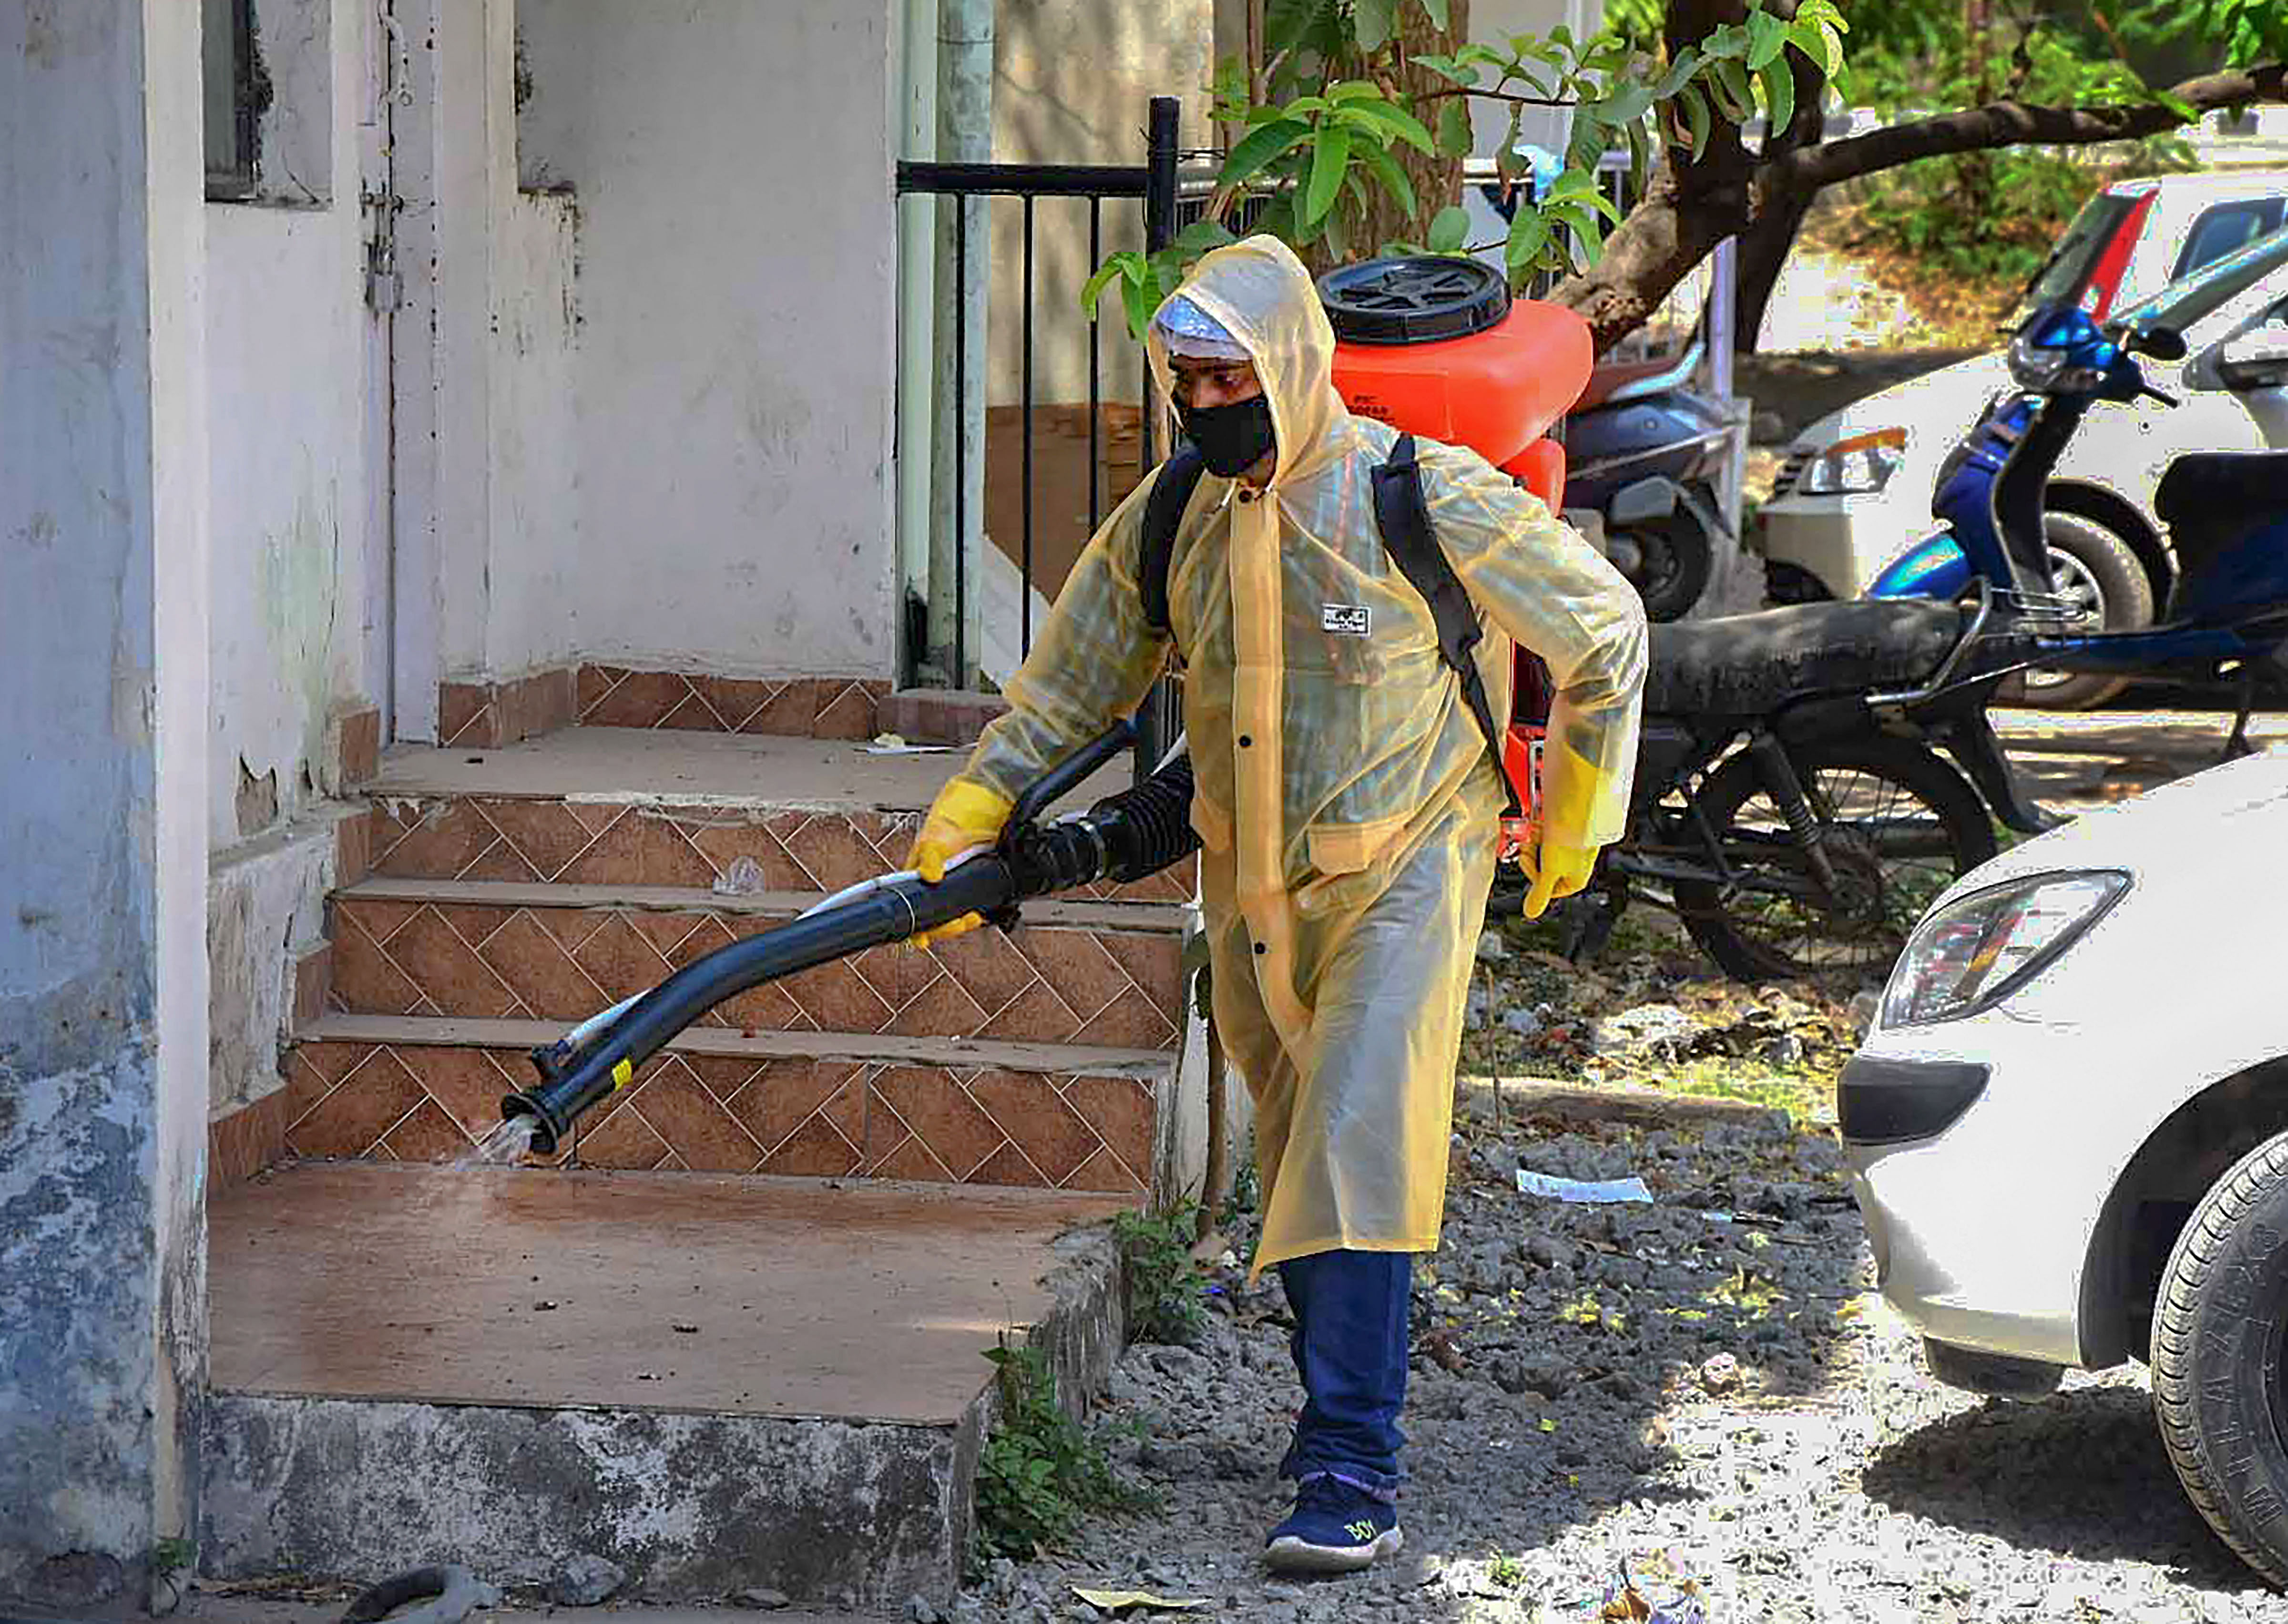 A BMC worker sprays disinfectant in the premises of a residential area to contain the spread of coronavirus during lockdown, in Bhopal. (Credit: PTI)